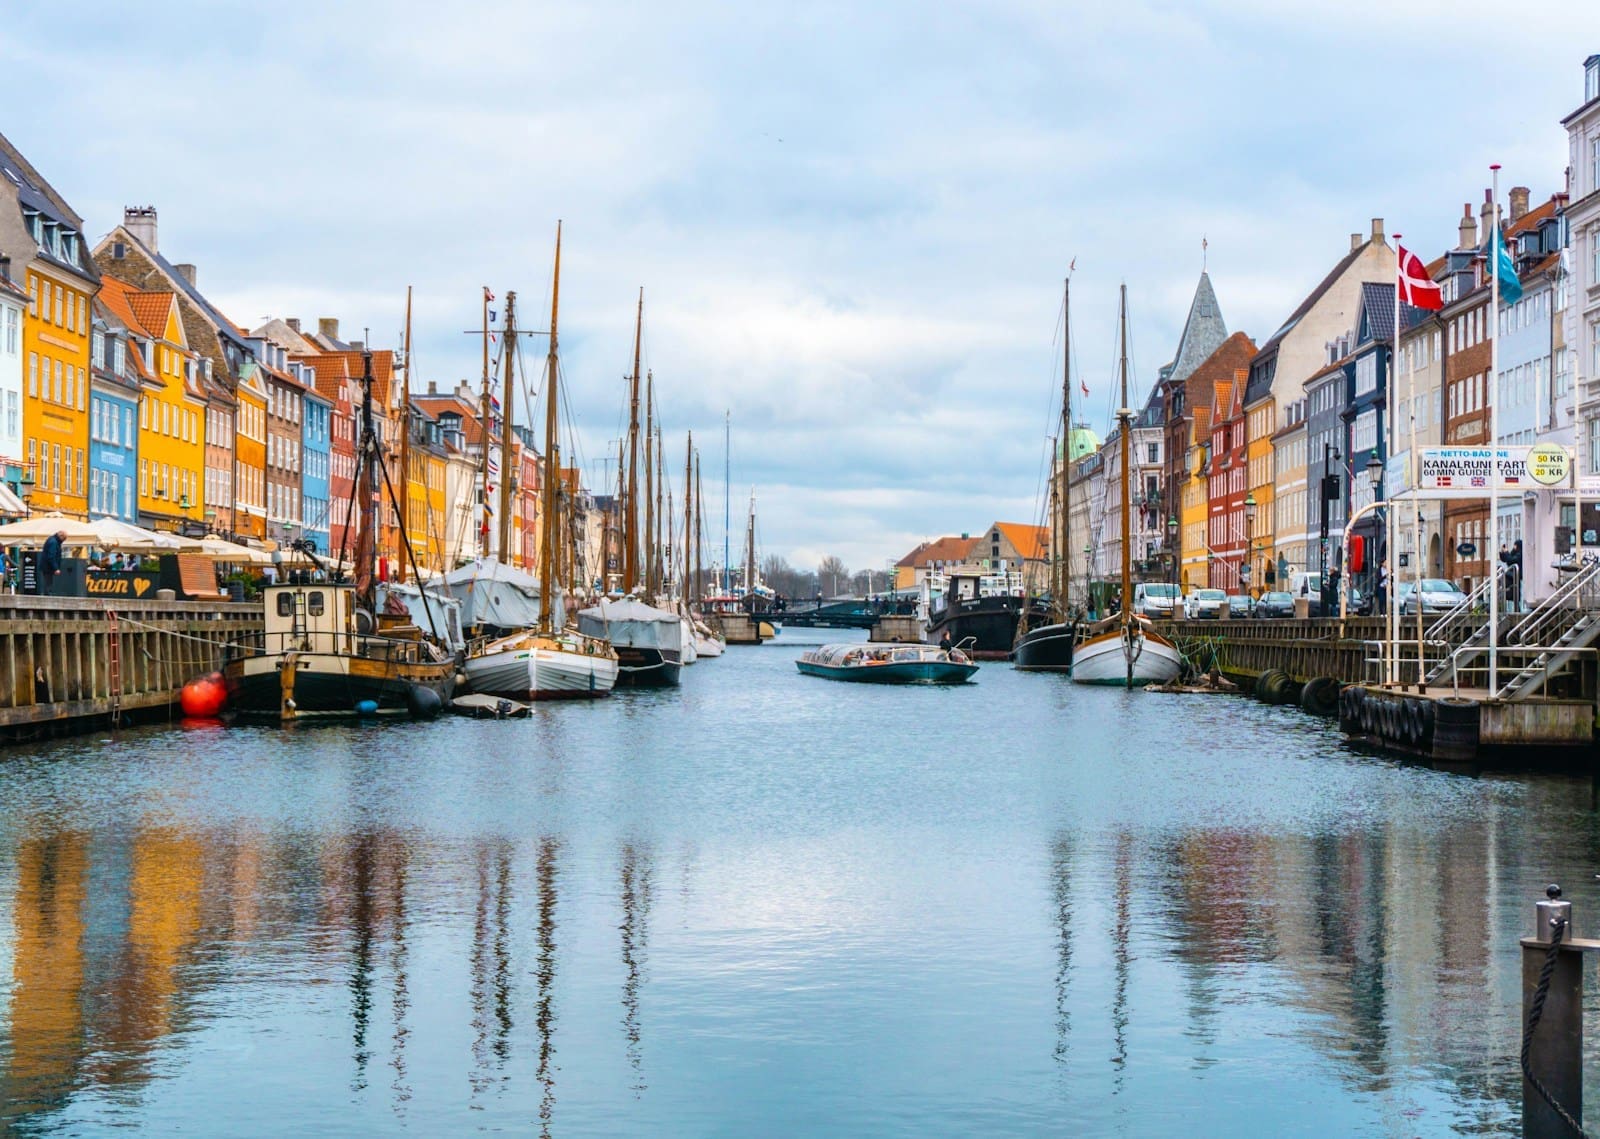 boats in canal in Denmark during daytime